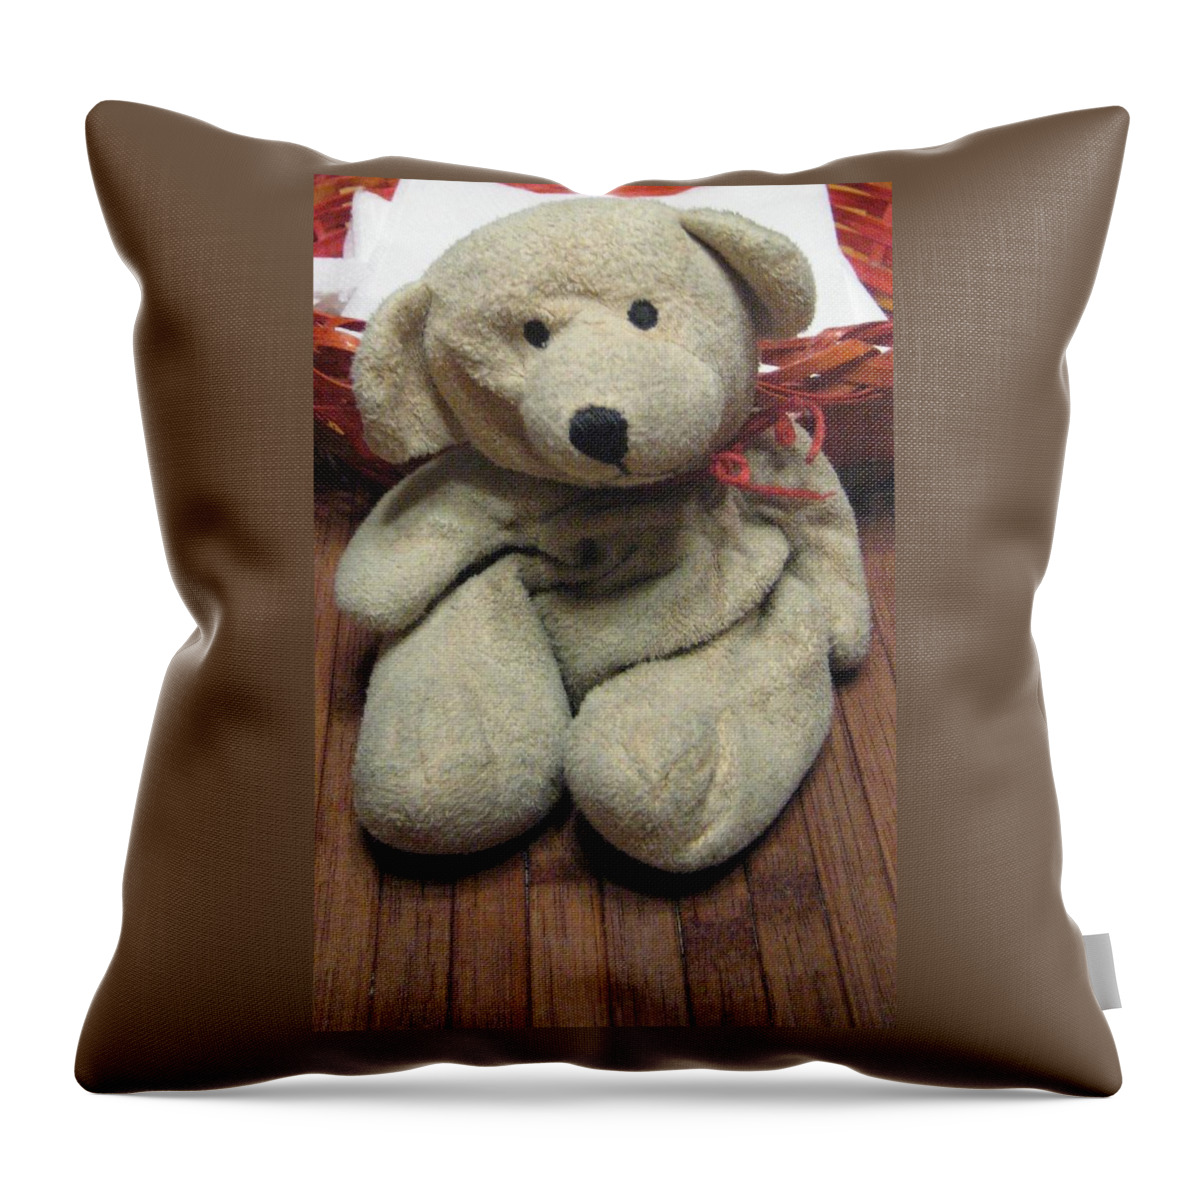 Still-life Throw Pillow featuring the photograph Beary Takes A Break by Melissa McCrann